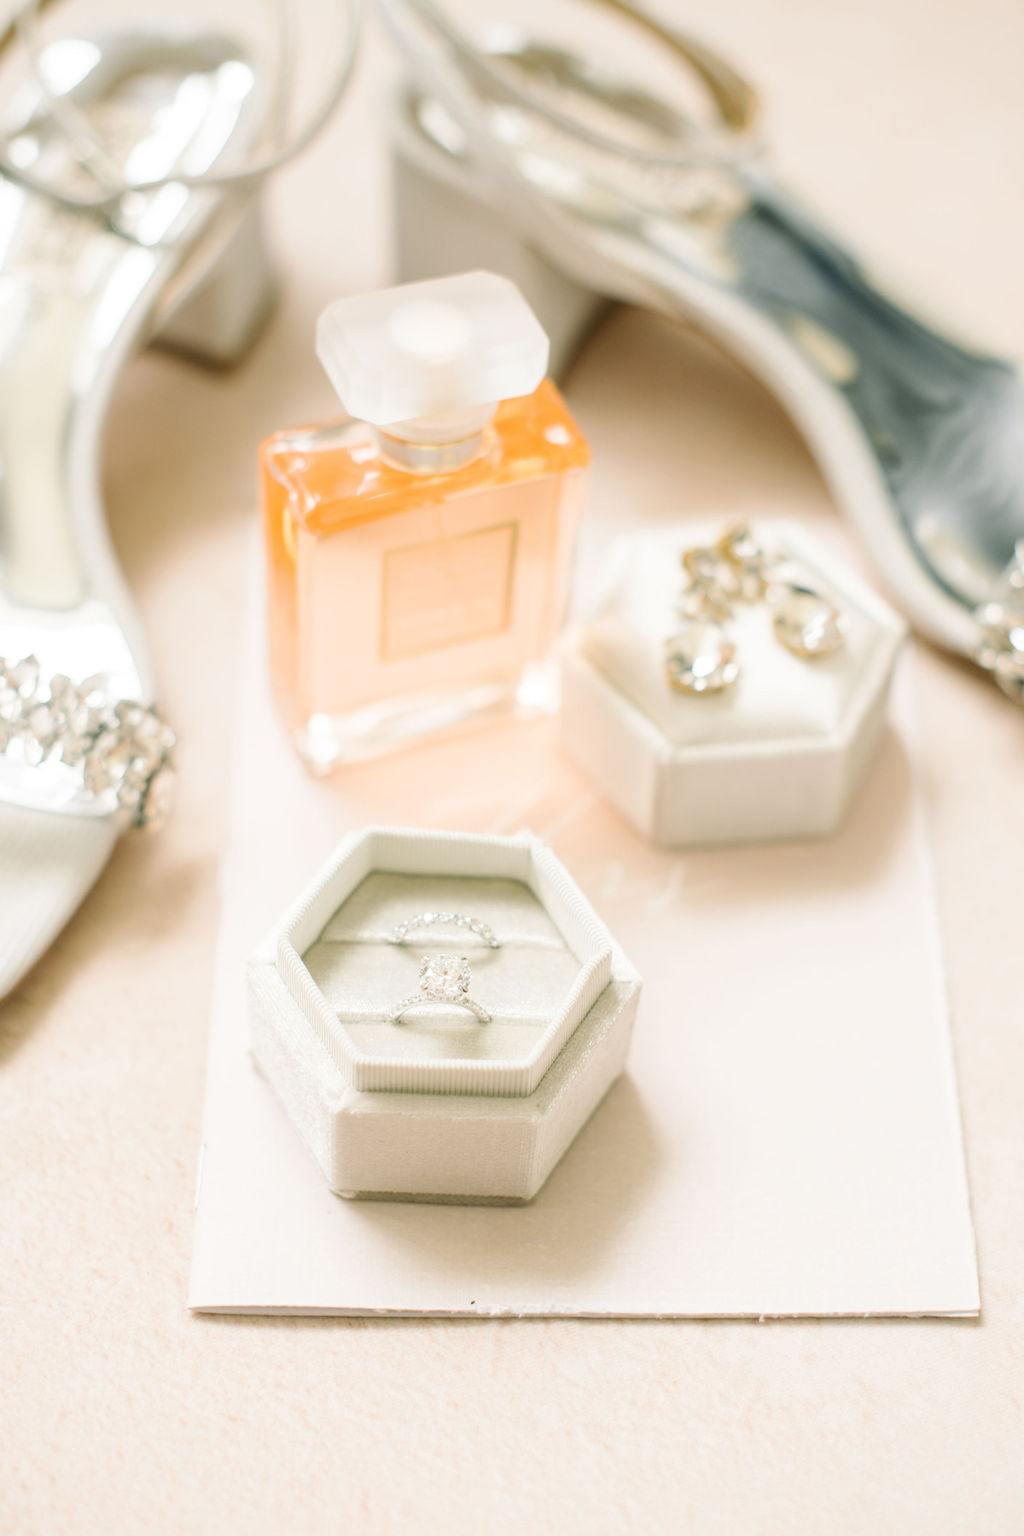 Styled bridal details including designer shoes by Badgley Mischka, peach perfume bottle, white hexagon ring box, and vow book. Spring wedding inspiration.